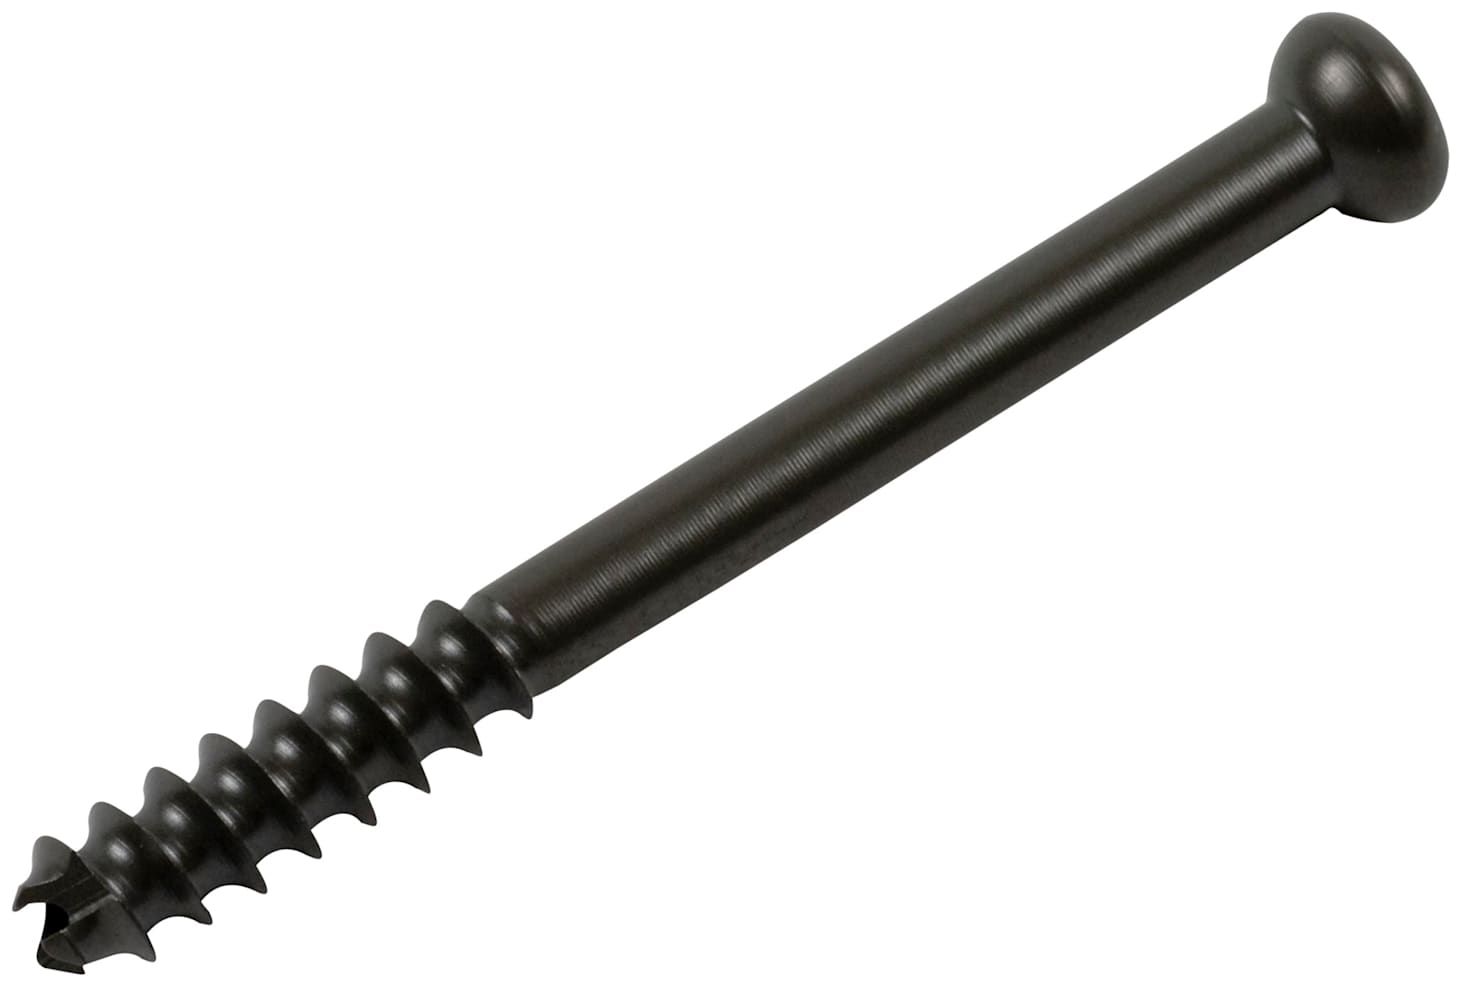 Low Profile Screw, Titanium, 4.5 mm x 45 mm, Cannulated, Partially Threaded